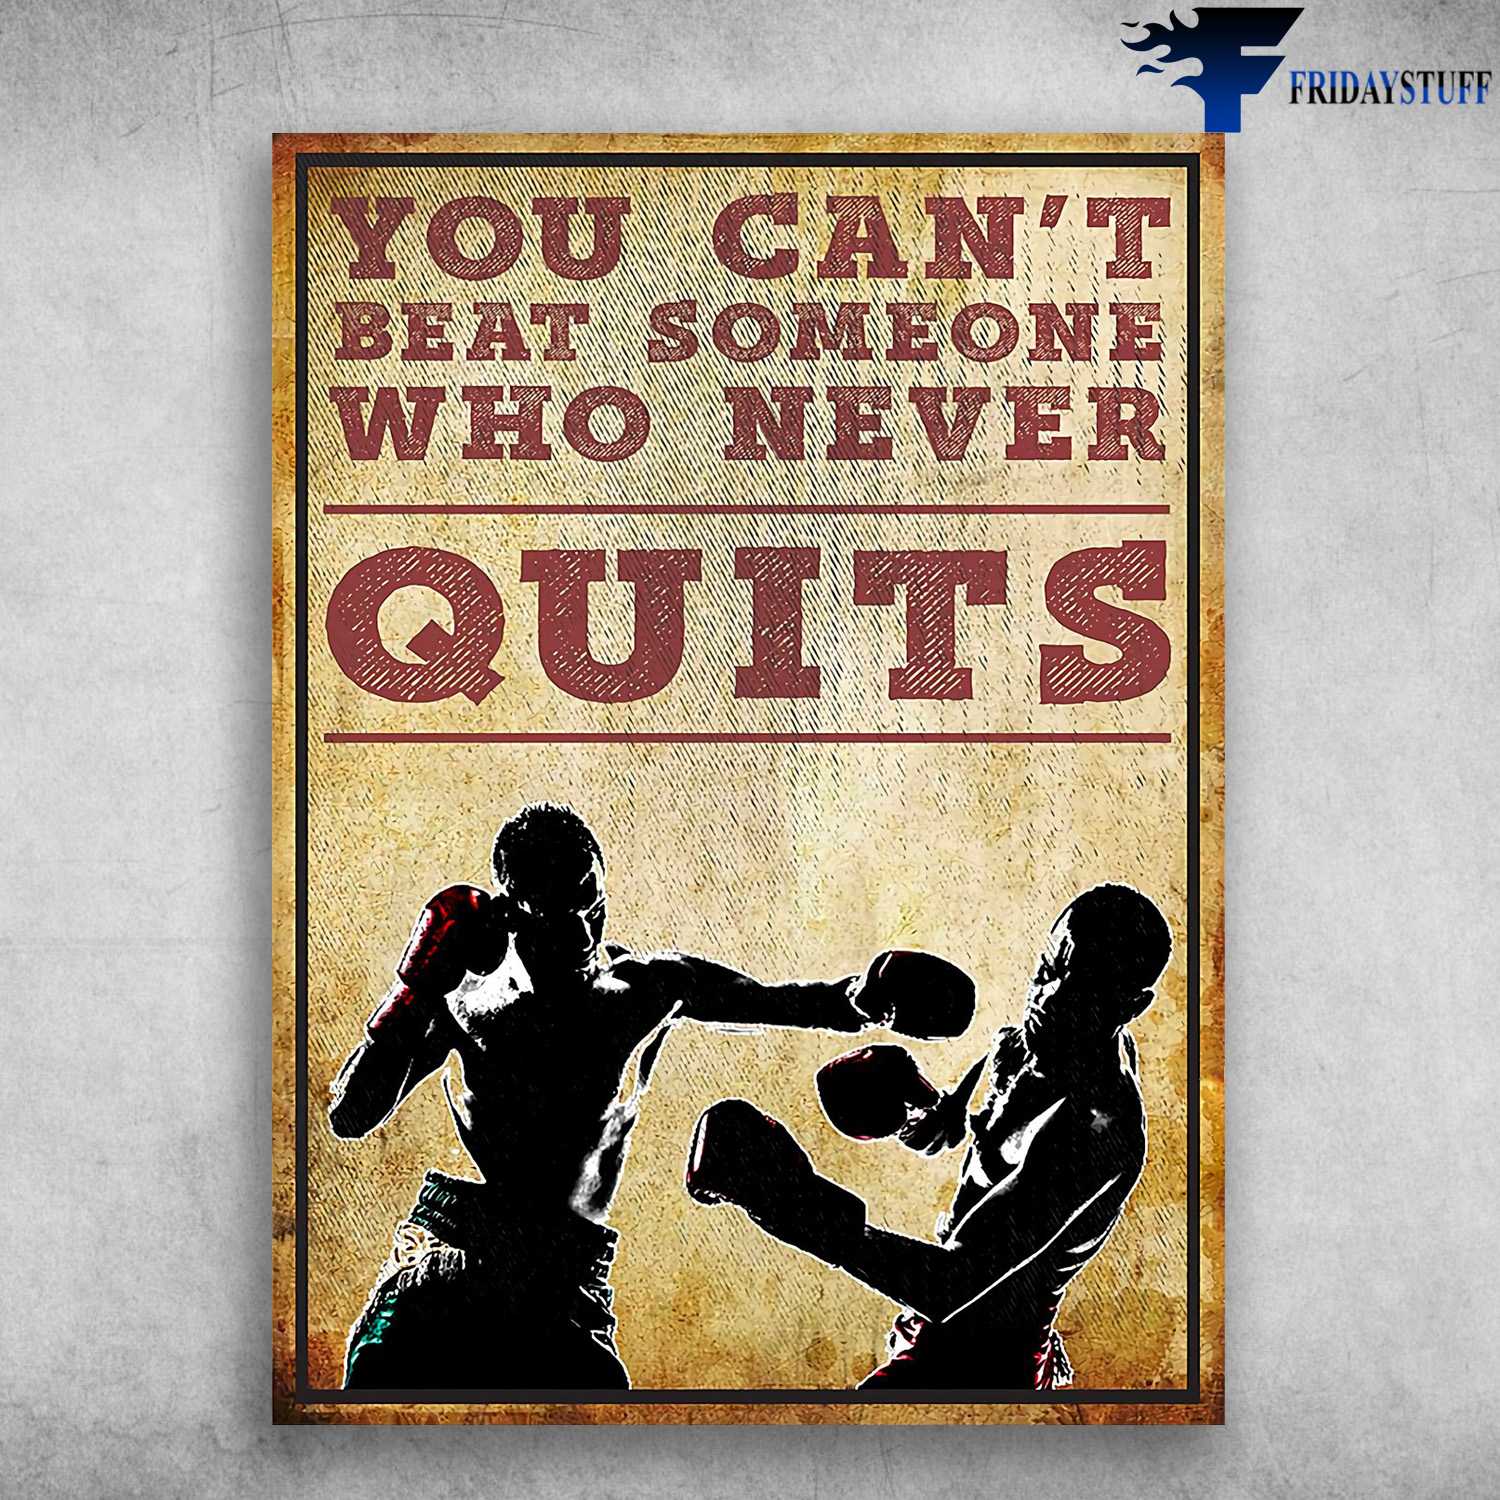 Boxing Poster - You Can't Beat Someone, Who Never Quits